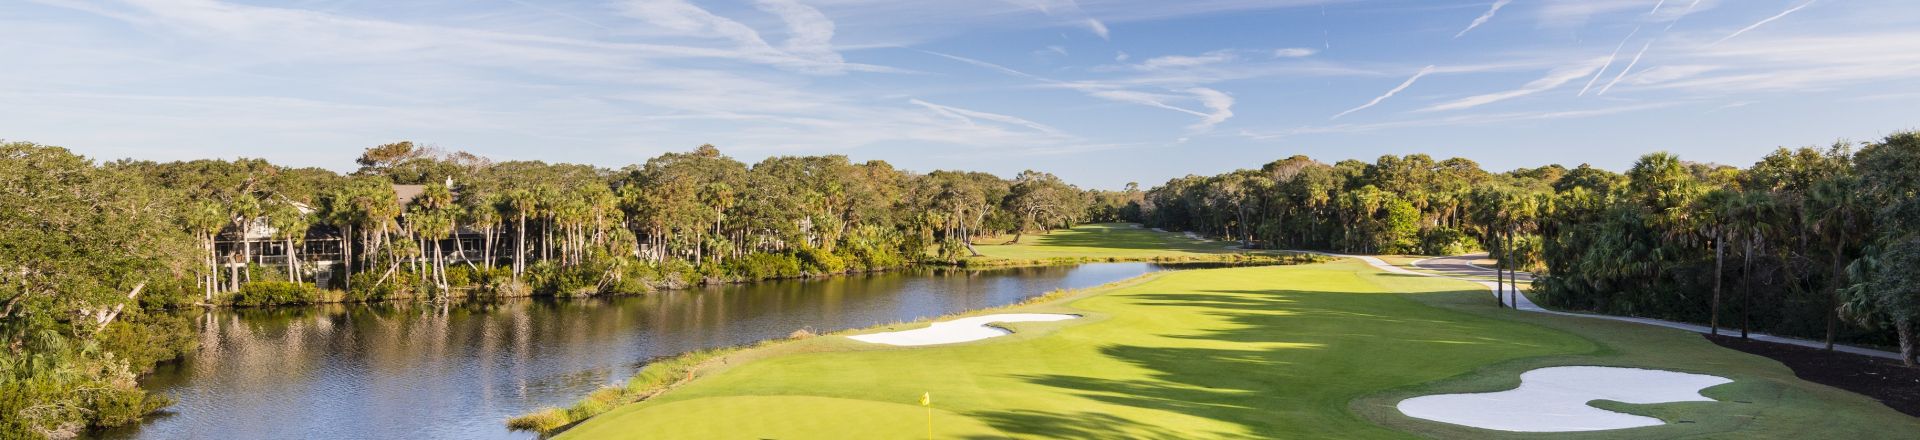 Discover the coastal allure of Turtle Point Golf Course at Kiawah Island Golf Resort. This captivating image invites you to a world-class golfing experience featuring meticulously designed fairways and the natural beauty of Kiawah Island.